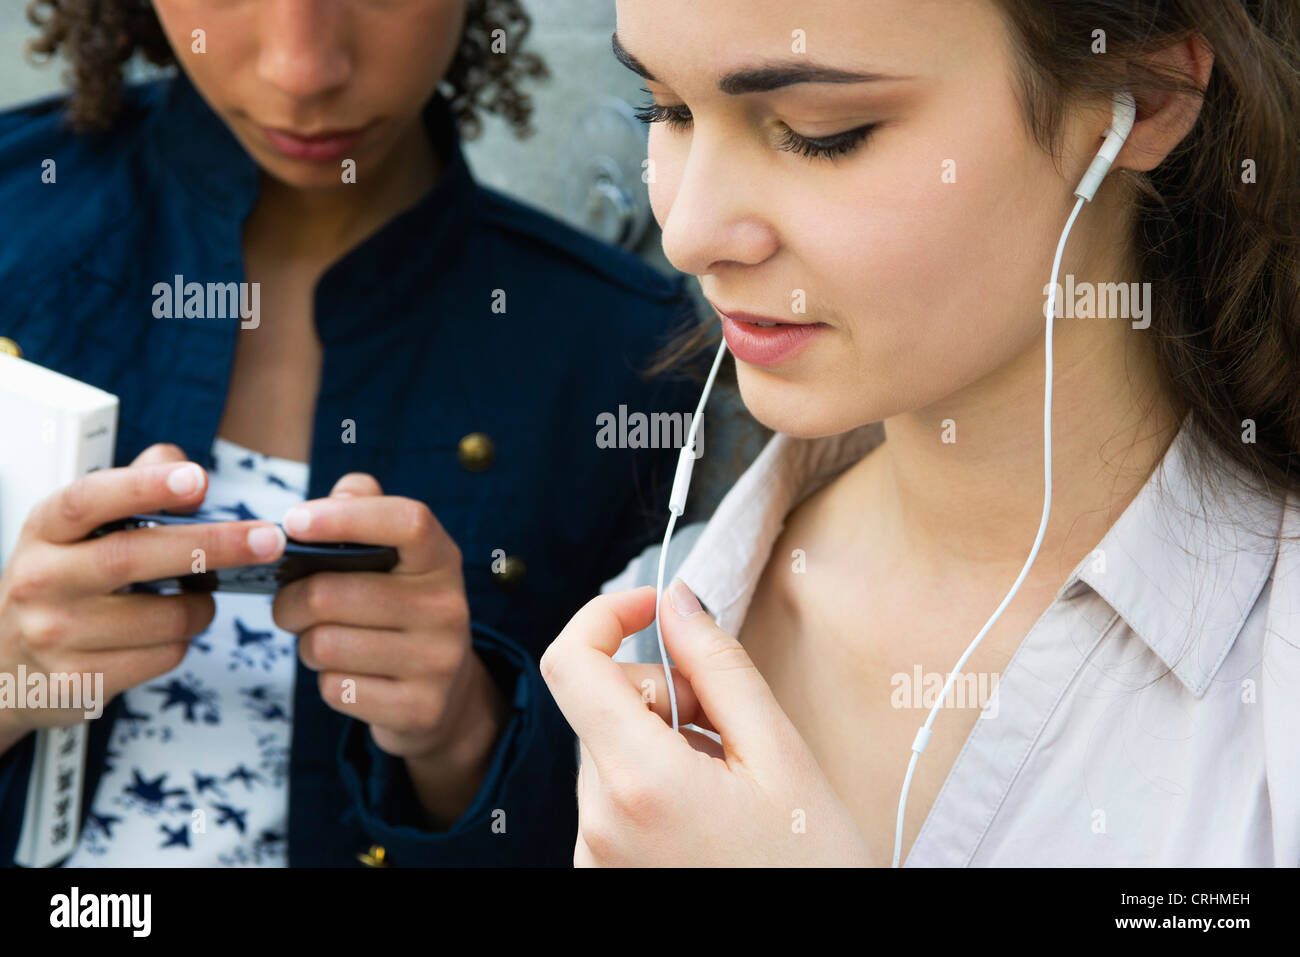 Young woman standing with friend, listening to earphones Stock Photo